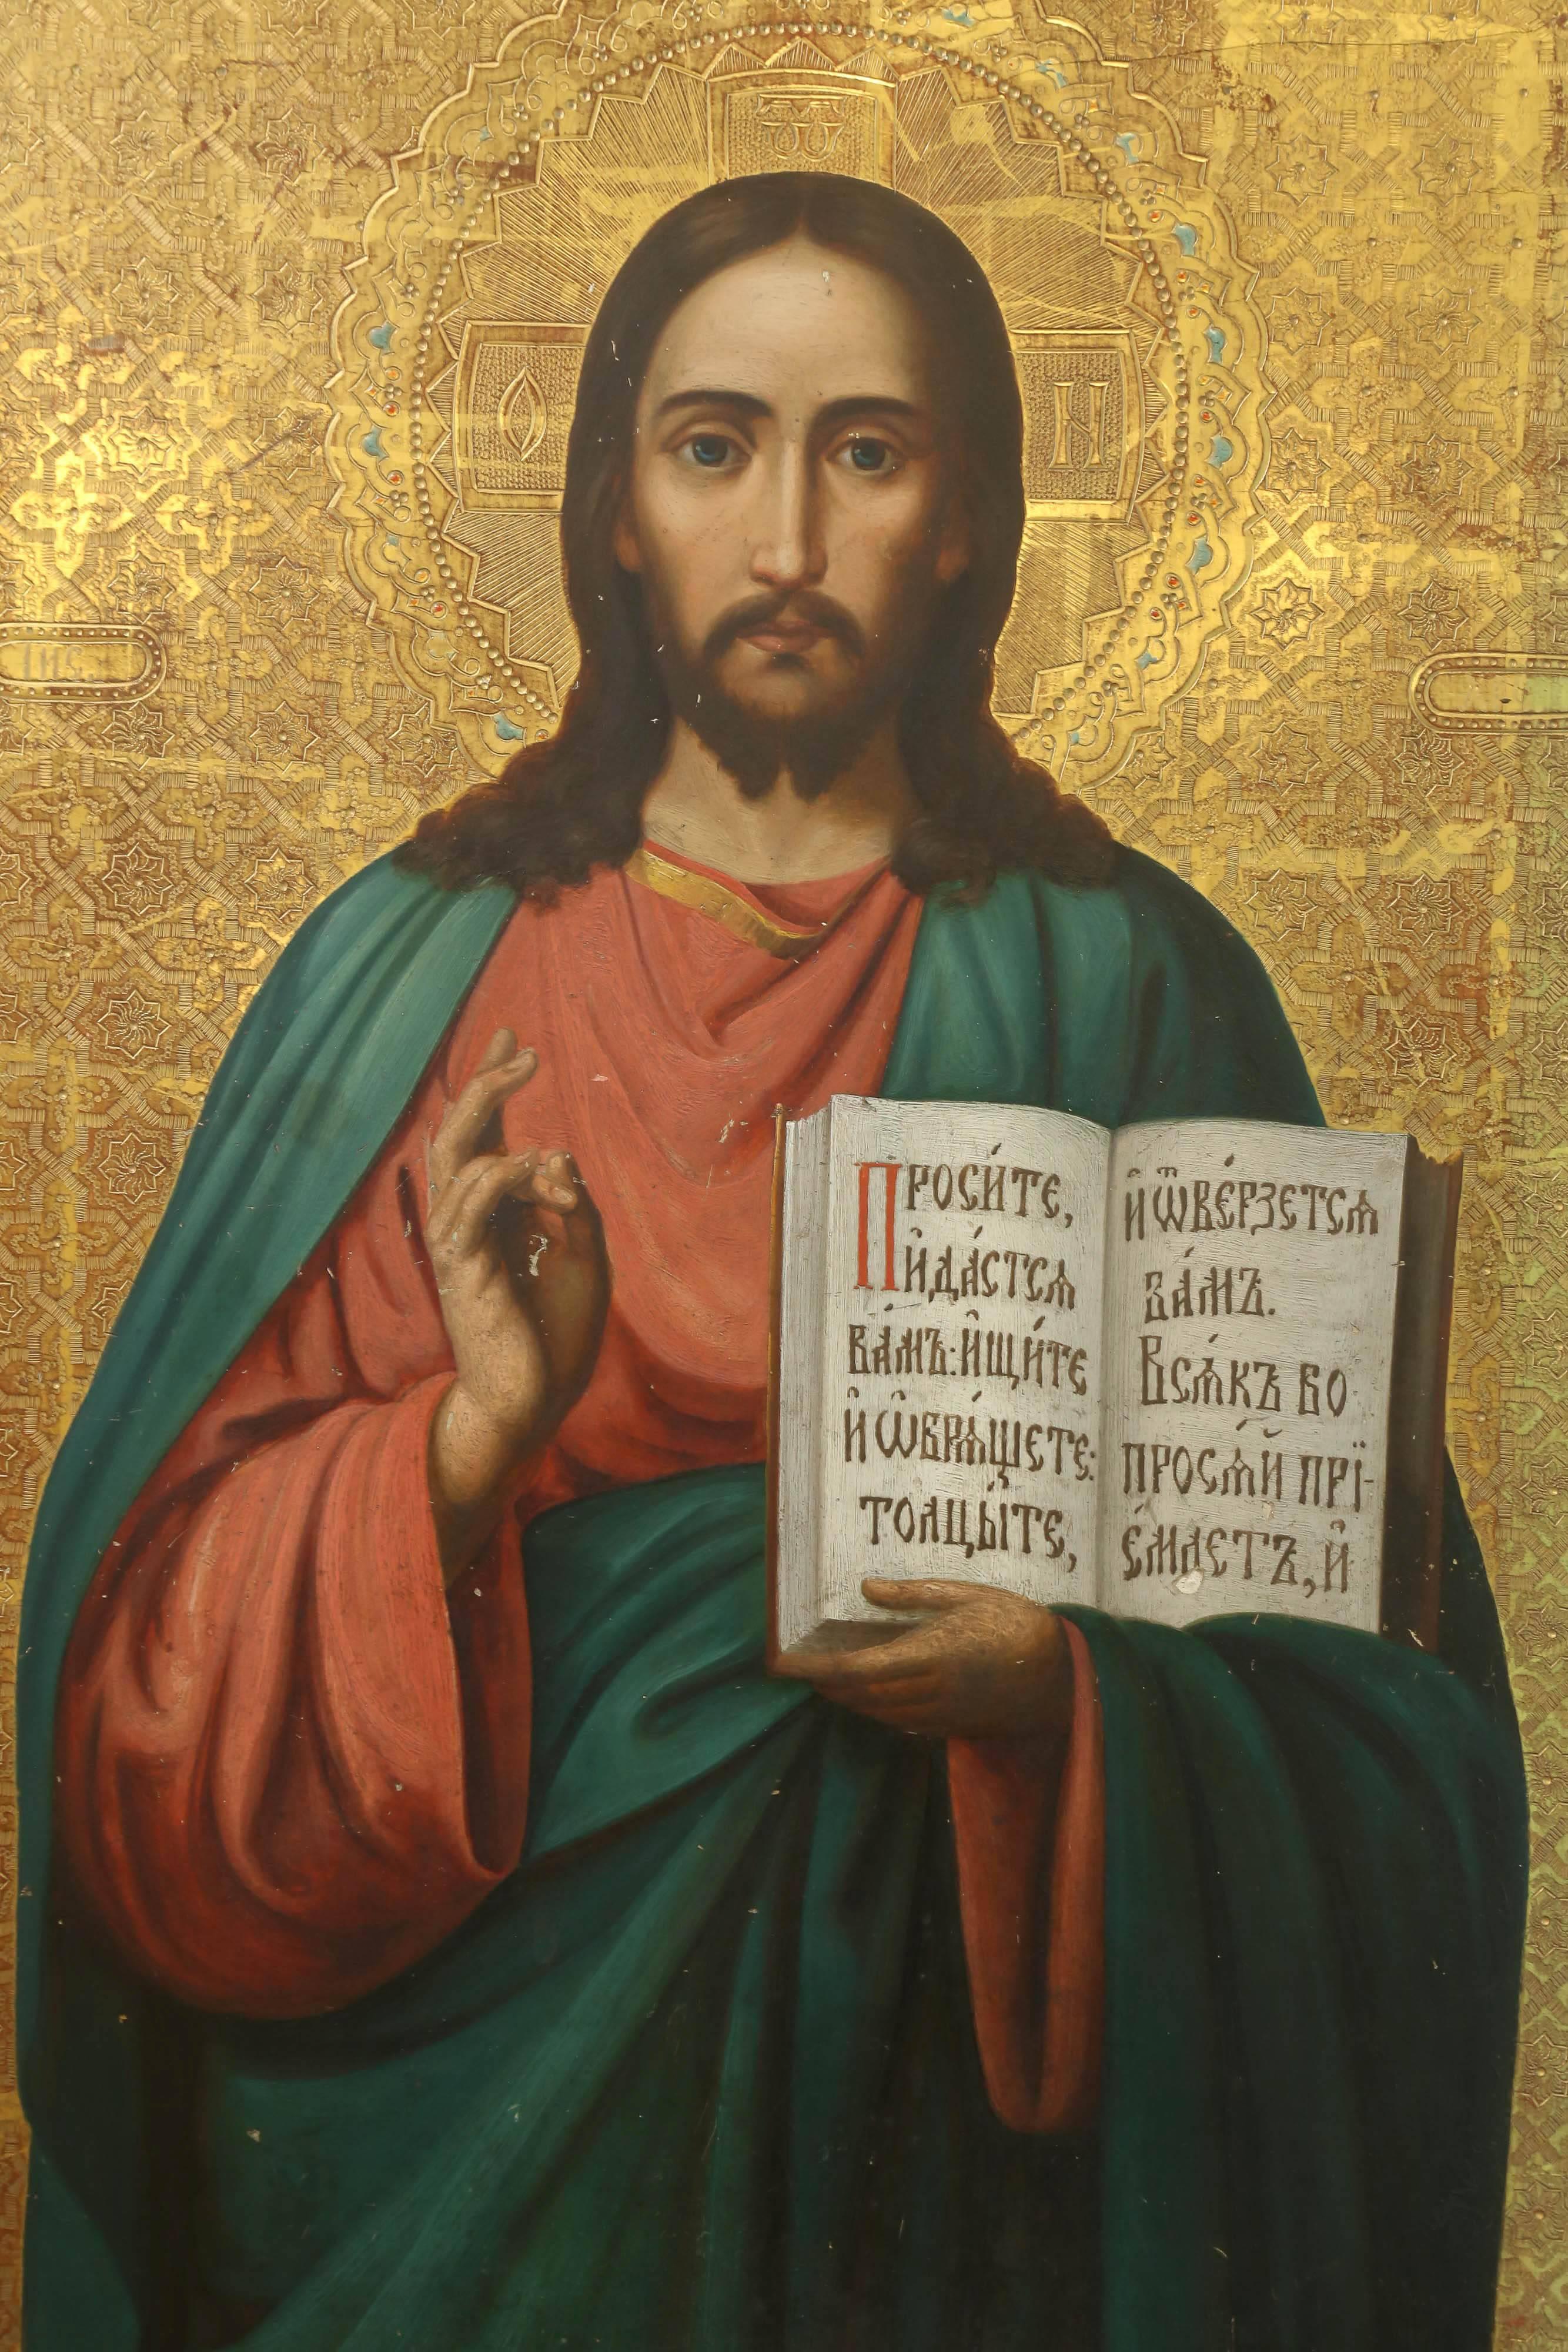 Oil on gesso on board, gold leaf on the background. 

 “God Almighty”, 1872

 Measures: 24.5” H x 17” W.
         